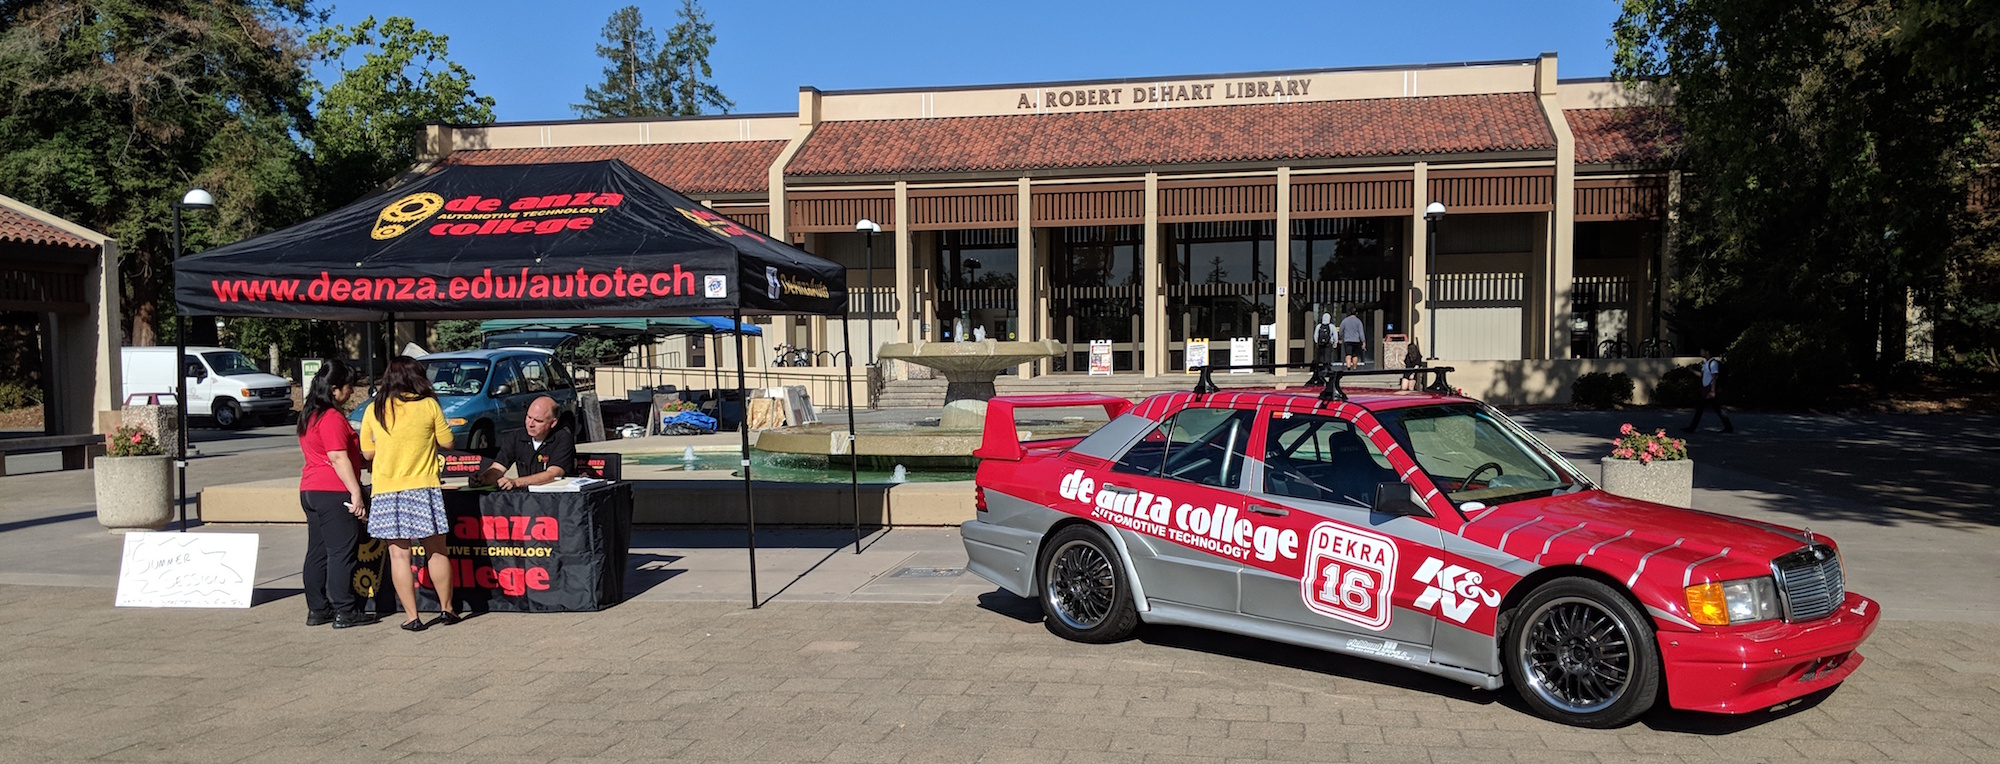 Auto Tech tent and car in main quad